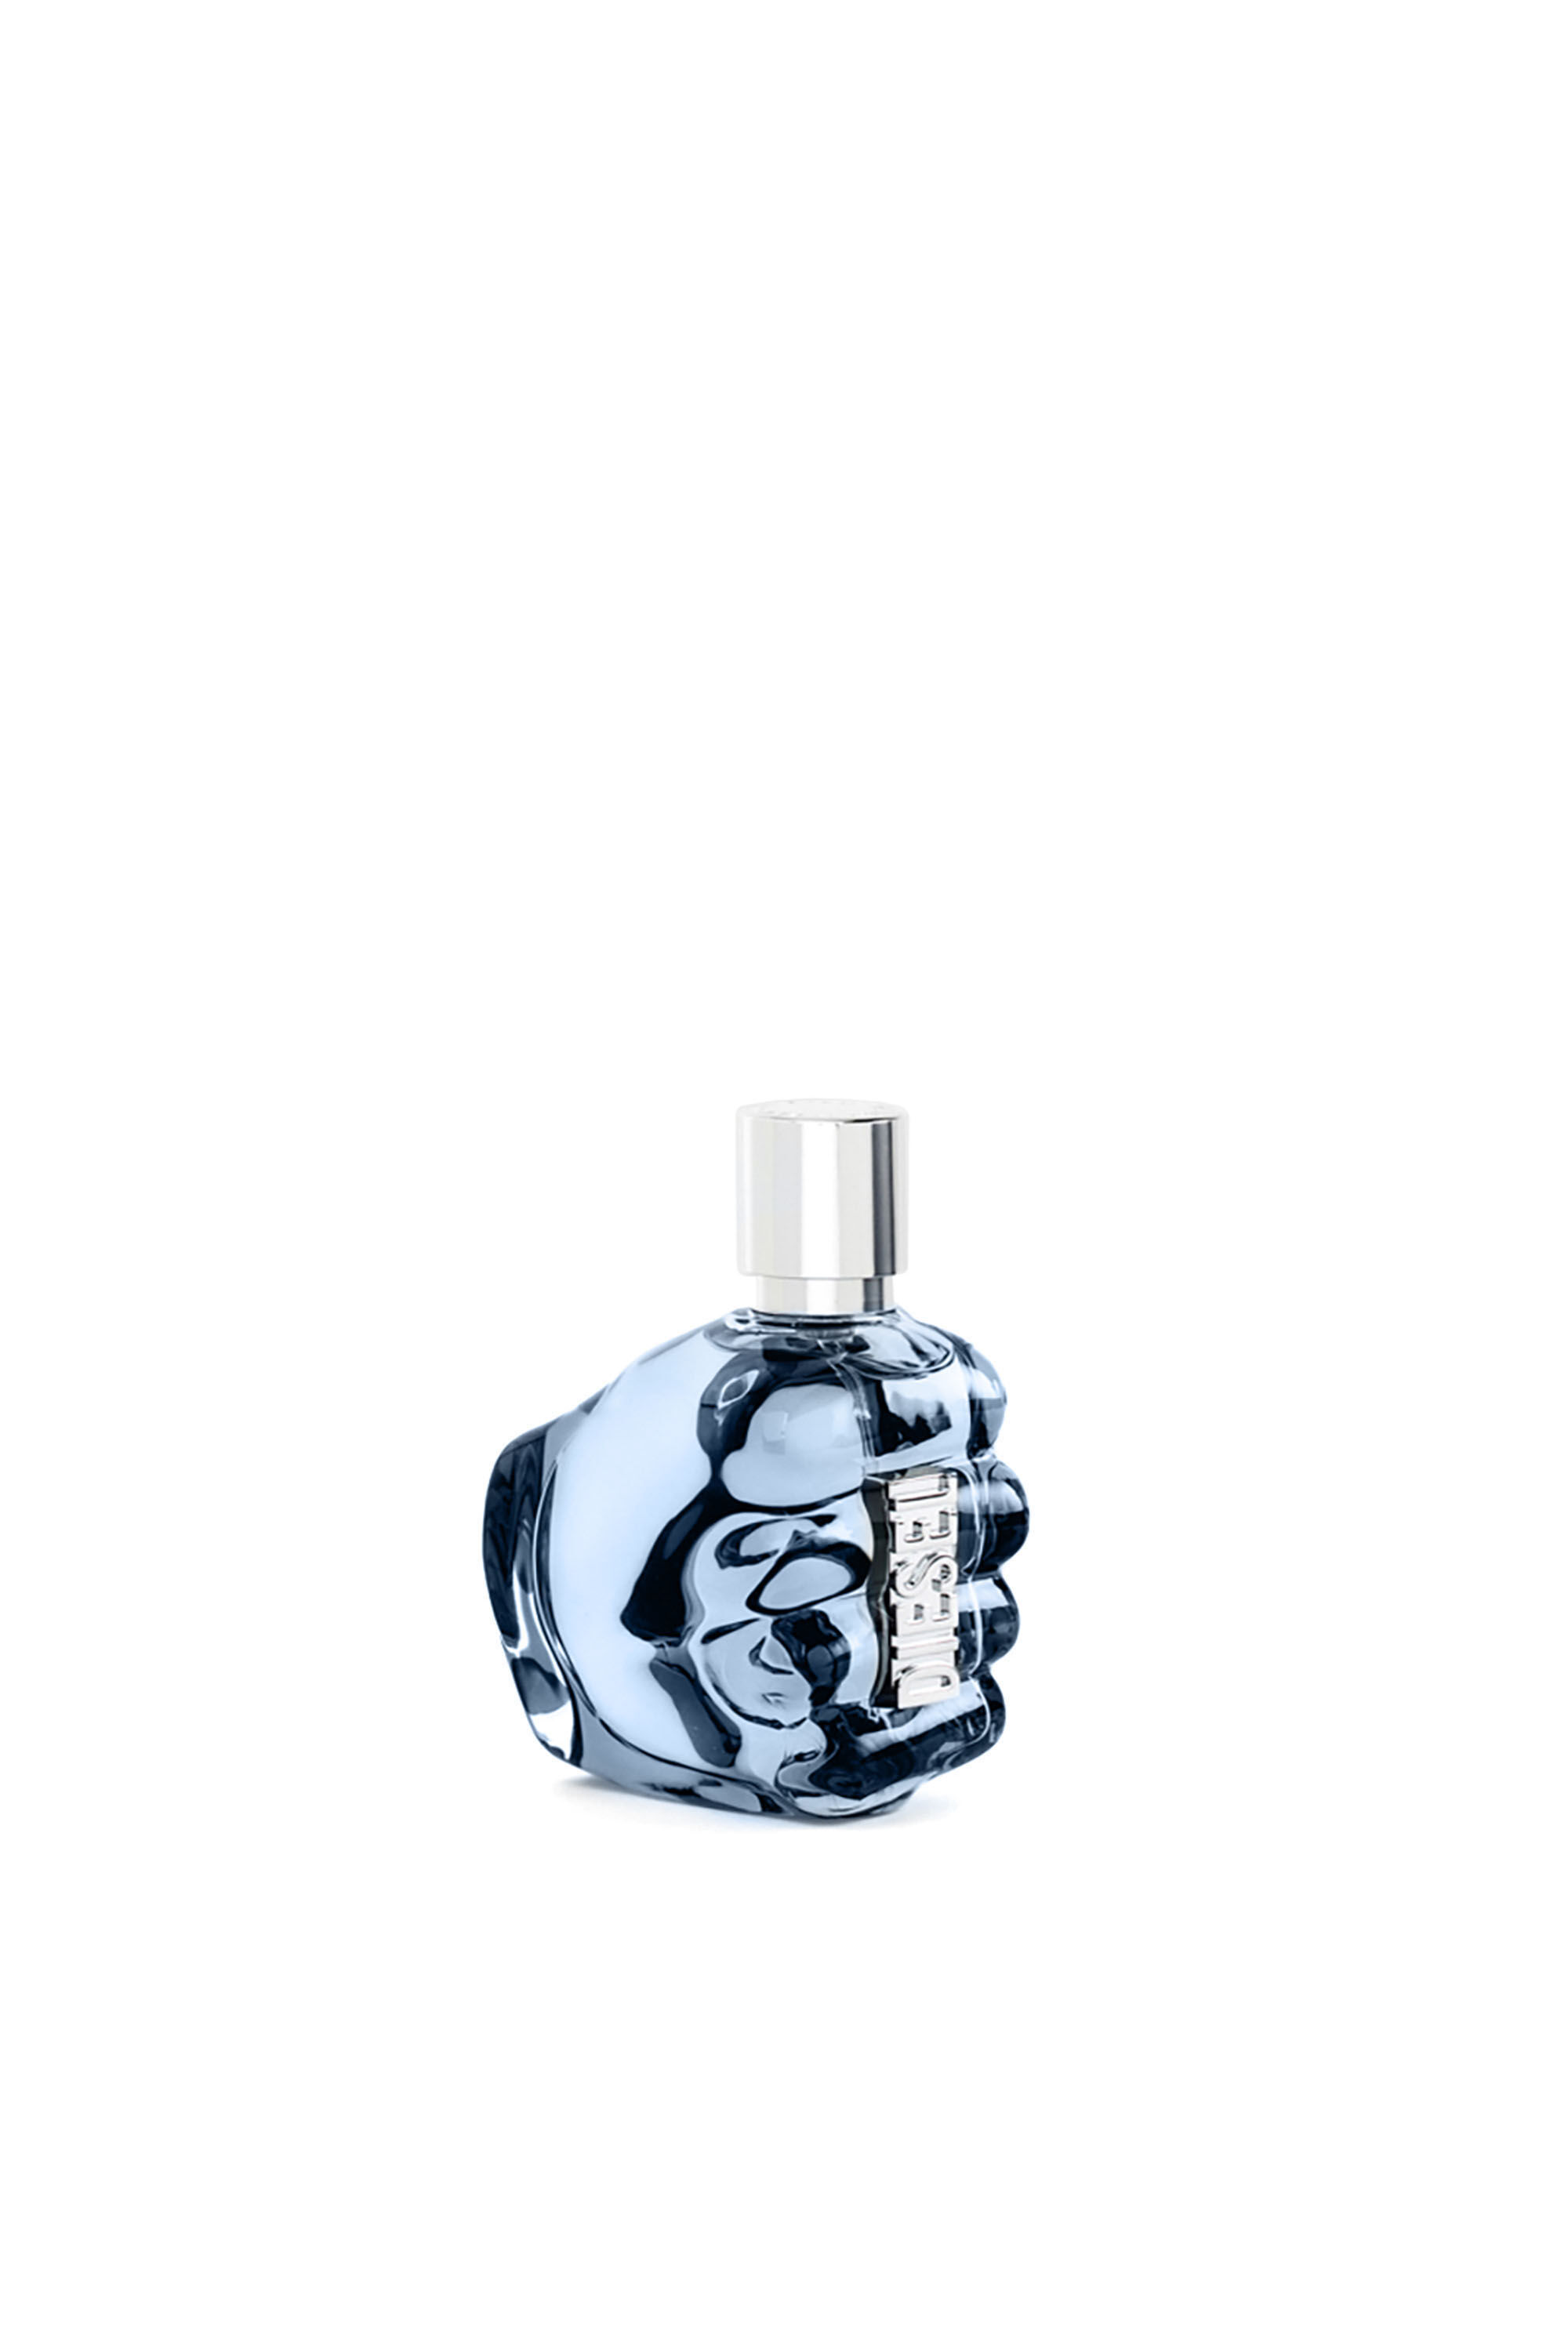 Diesel - ONLY THE BRAVE 50ML, Hombre Only The Brave 50ml, Eau de Toilette in Azul marino - Image 1